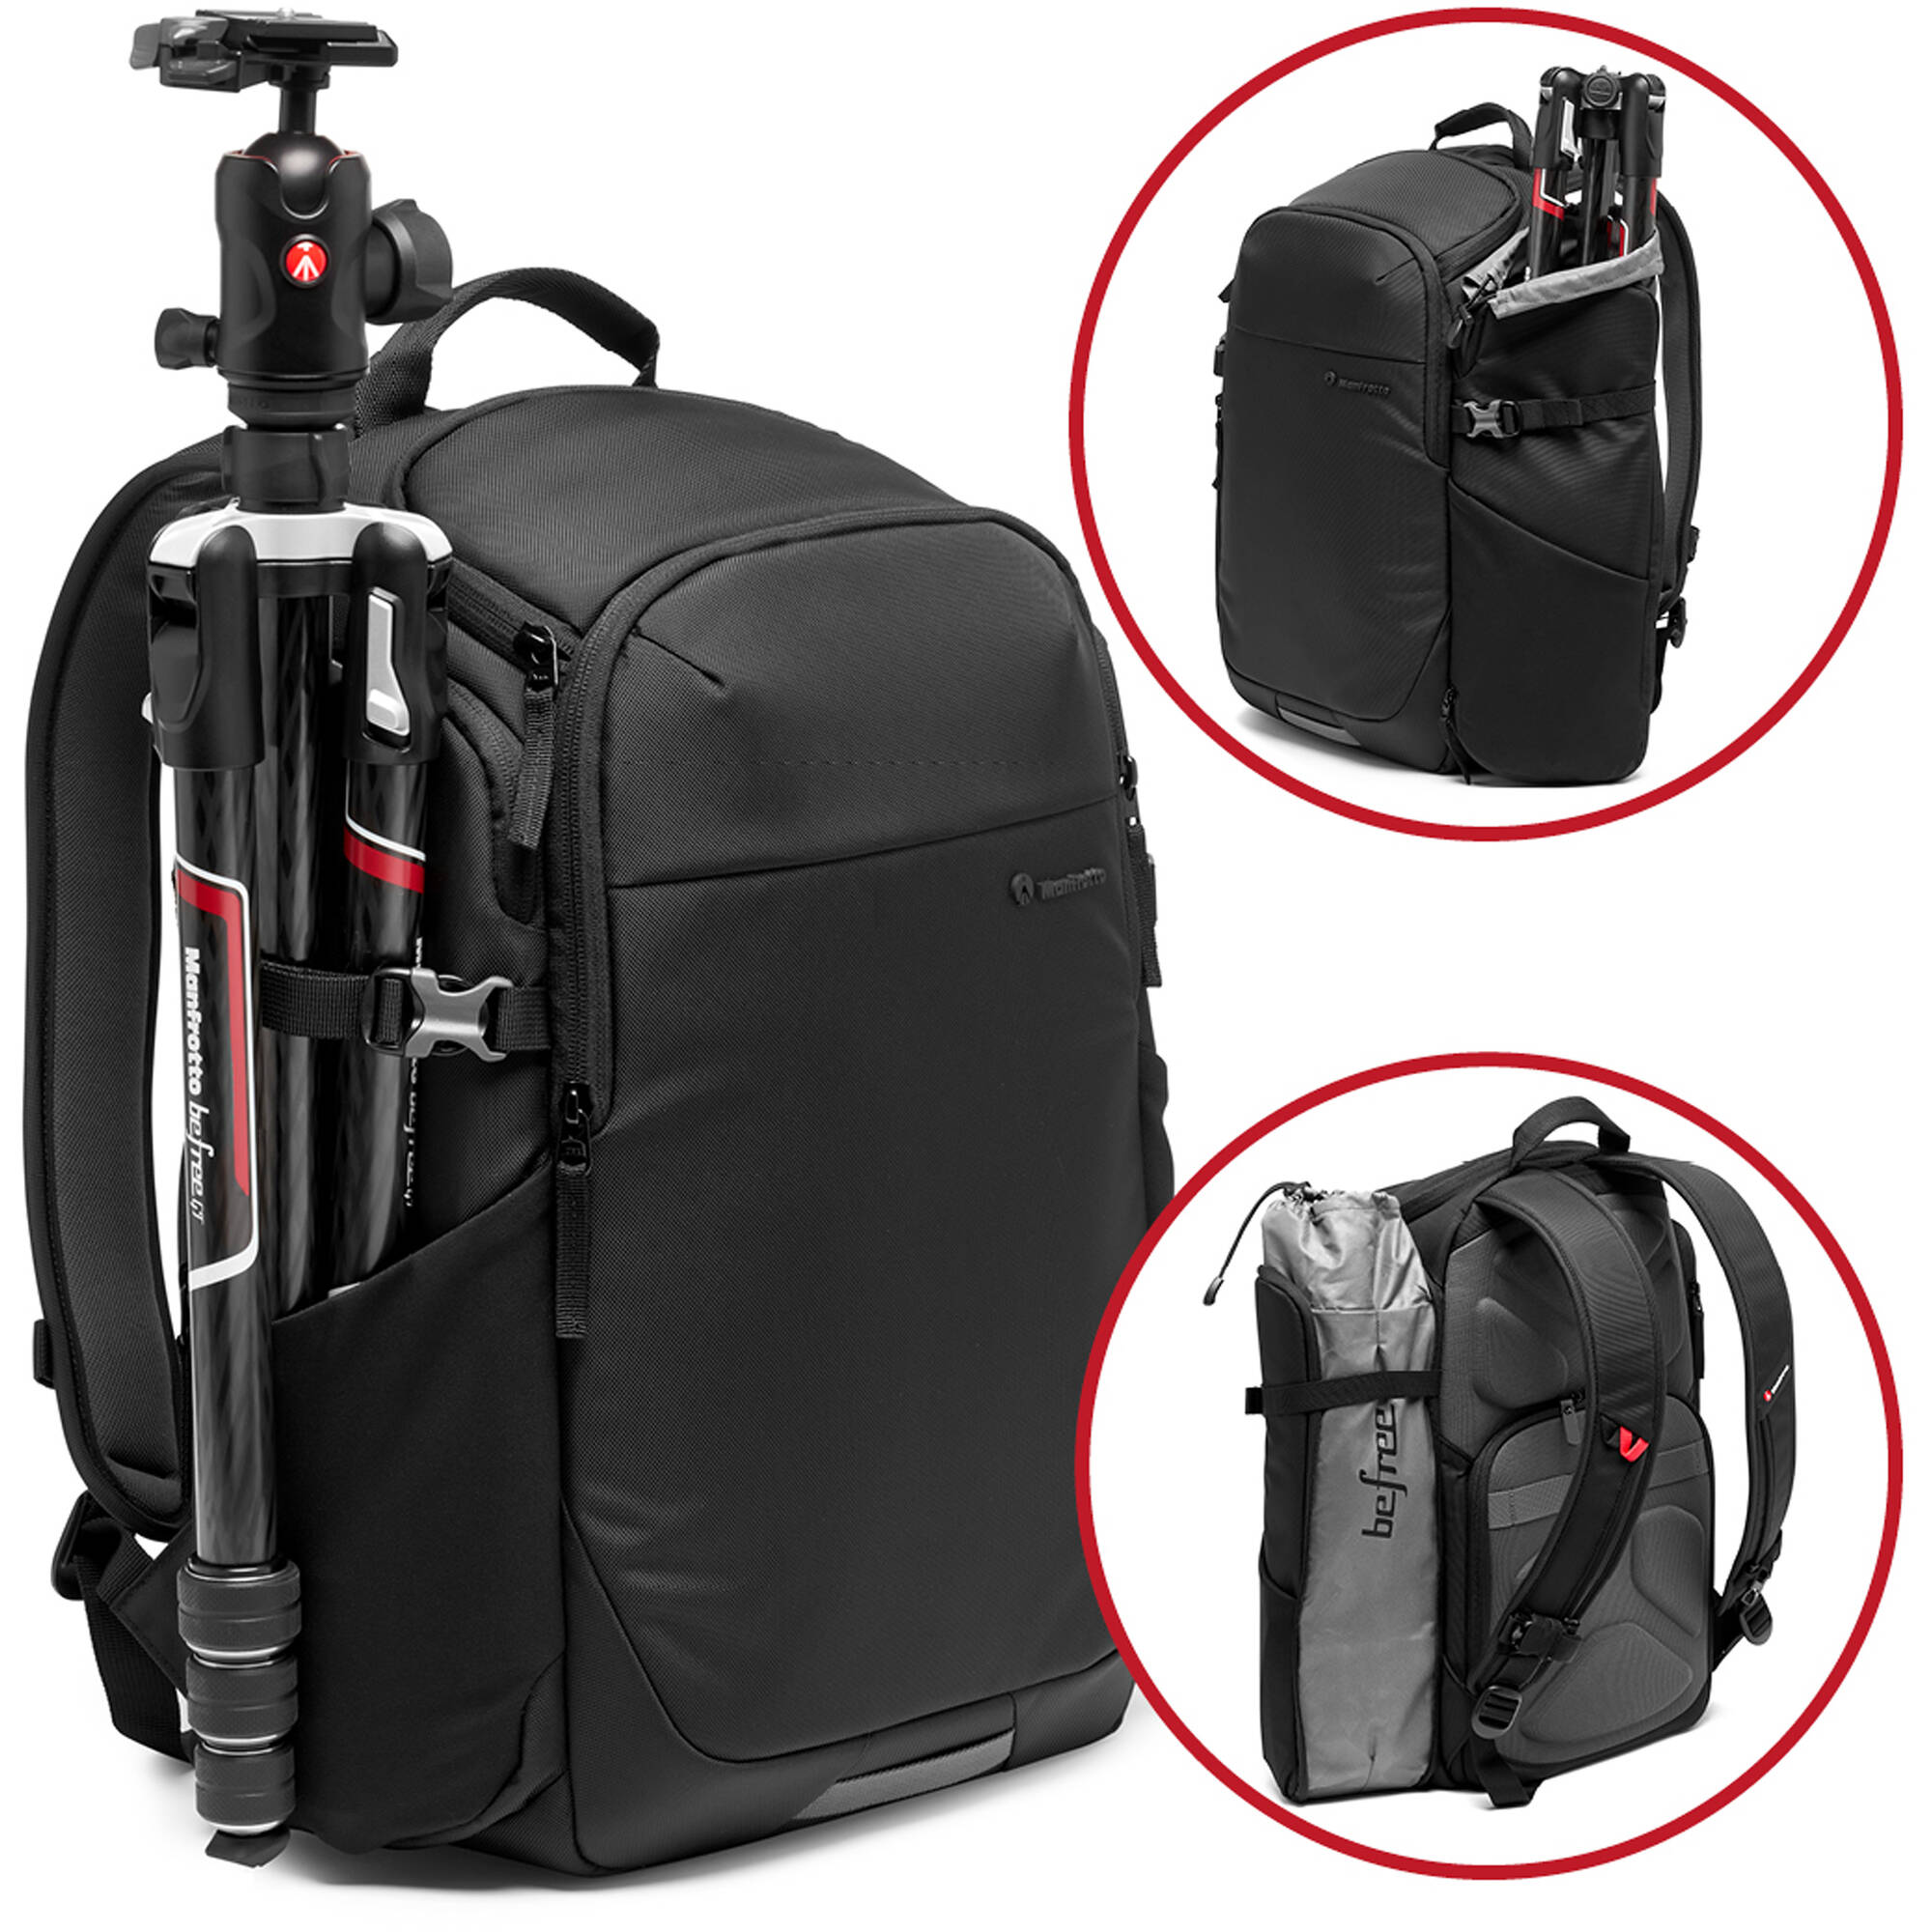 Backpack Manfrotto Advanced3 Befree III black